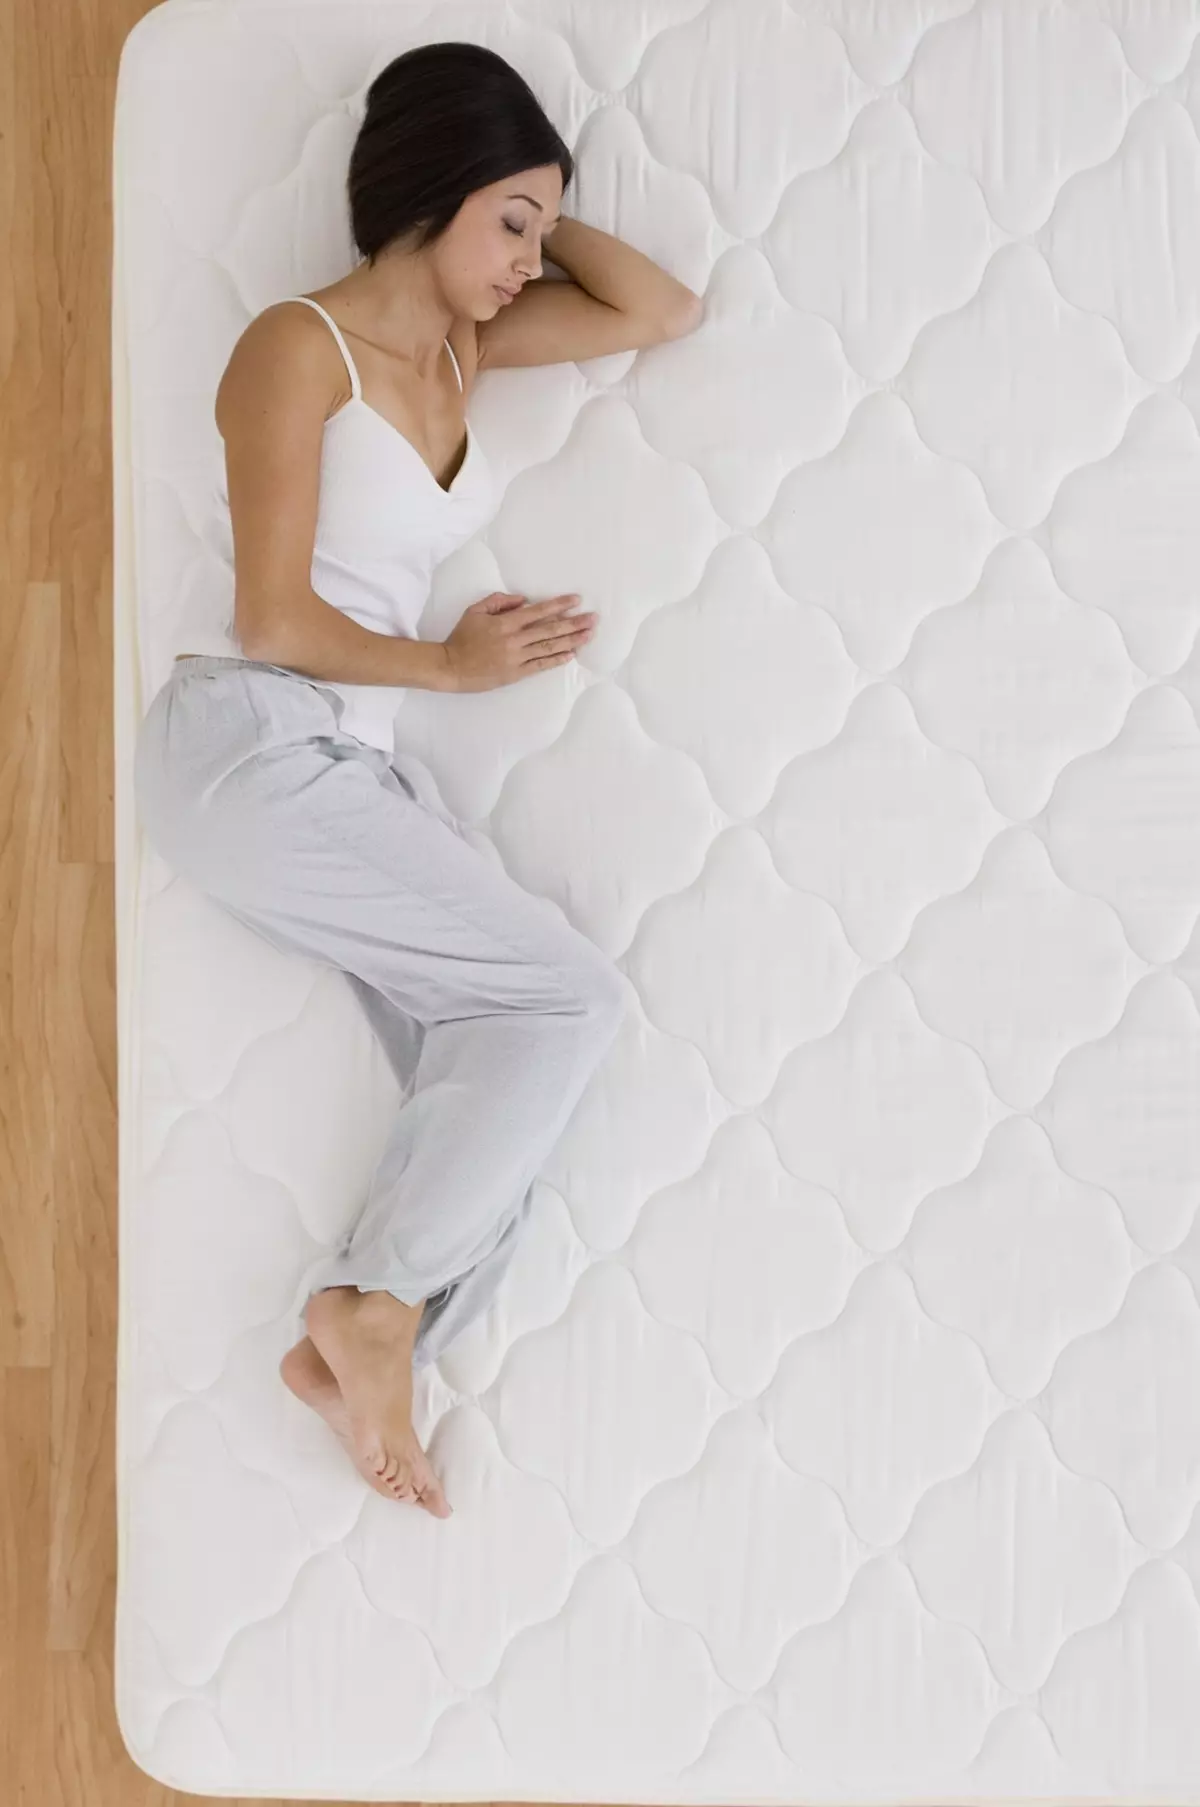 How to make mattress tougher? Selecting a stiffness overlay on a soft mattress. How to increase rigidity at home? 20788_7